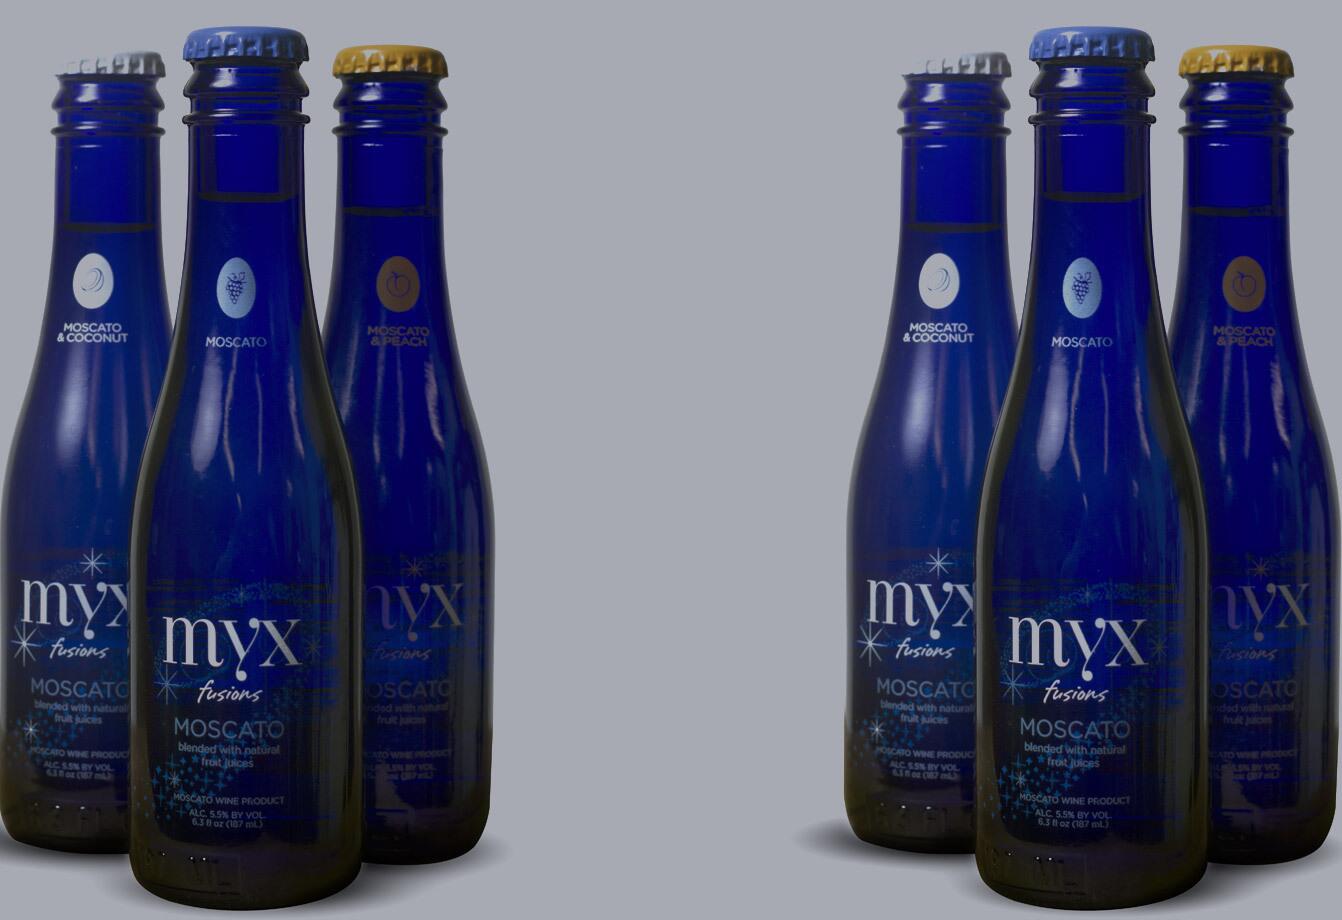 Myx Fusions Moscato Sparkling